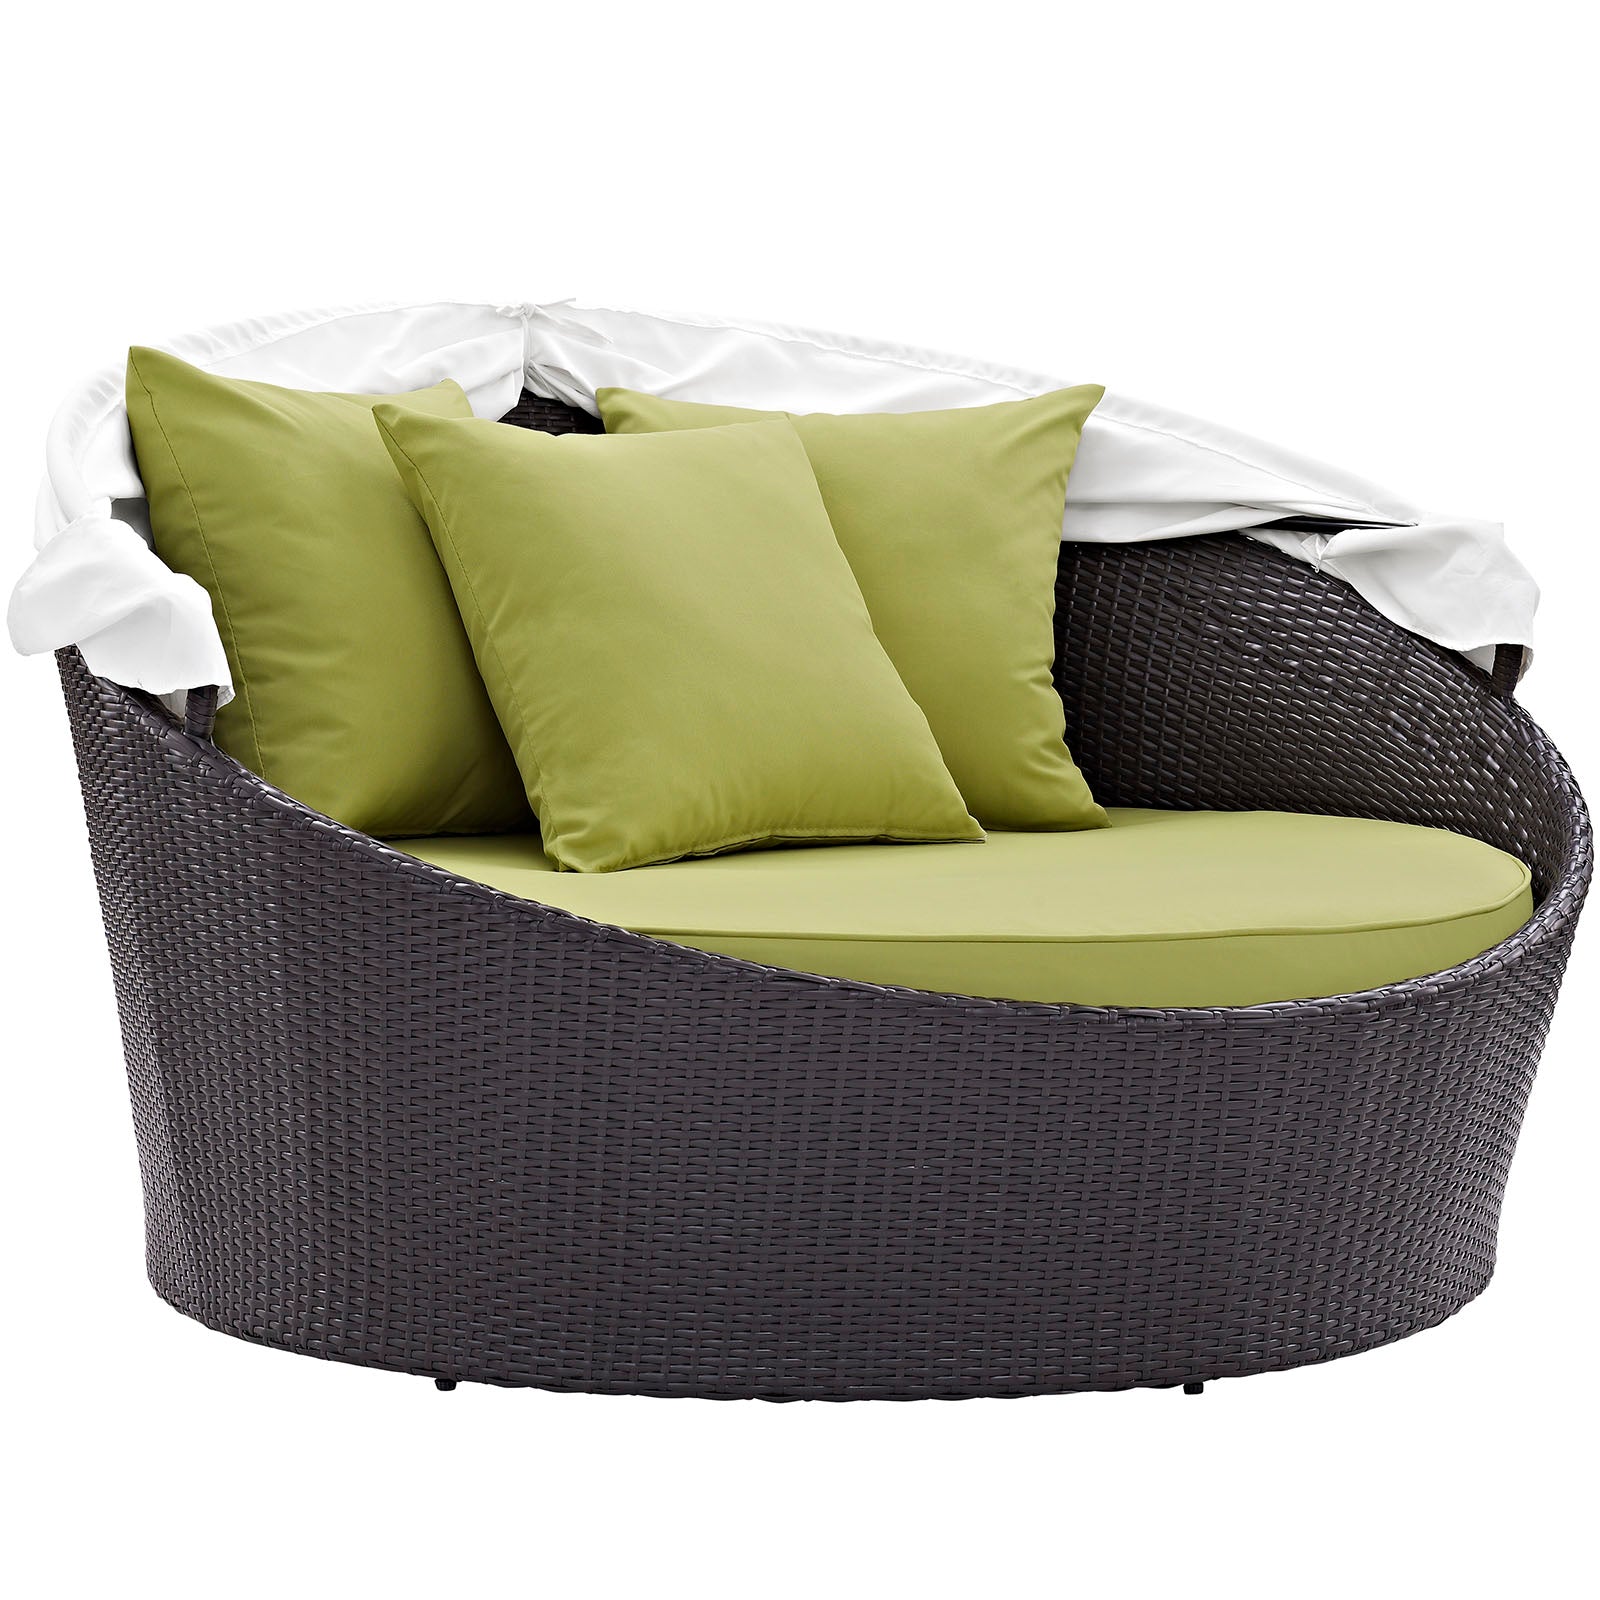 Modway Patio Daybeds - Convene Canopy Outdoor Patio Daybed Espresso Peridot